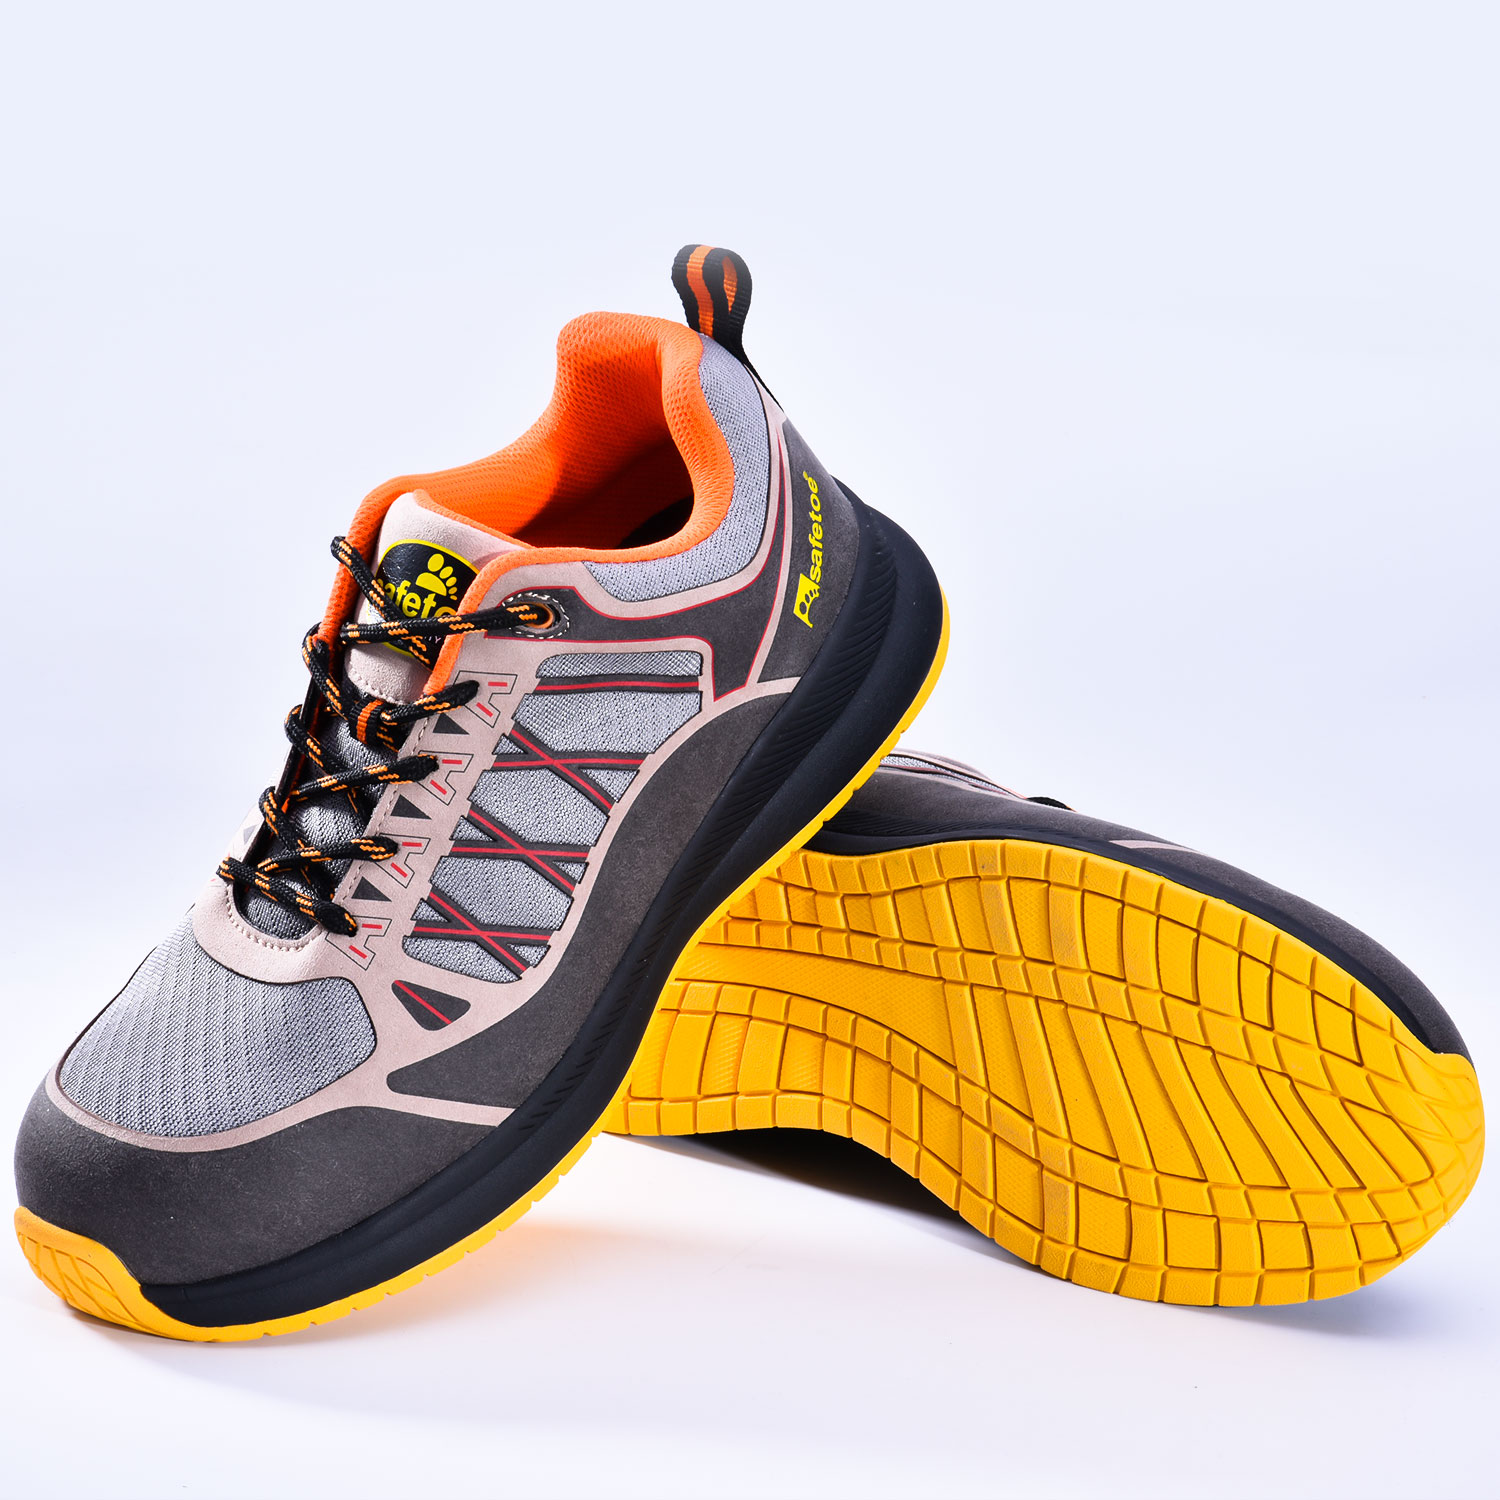 Industrial Sports Safety Shoes L-7392 Yellow